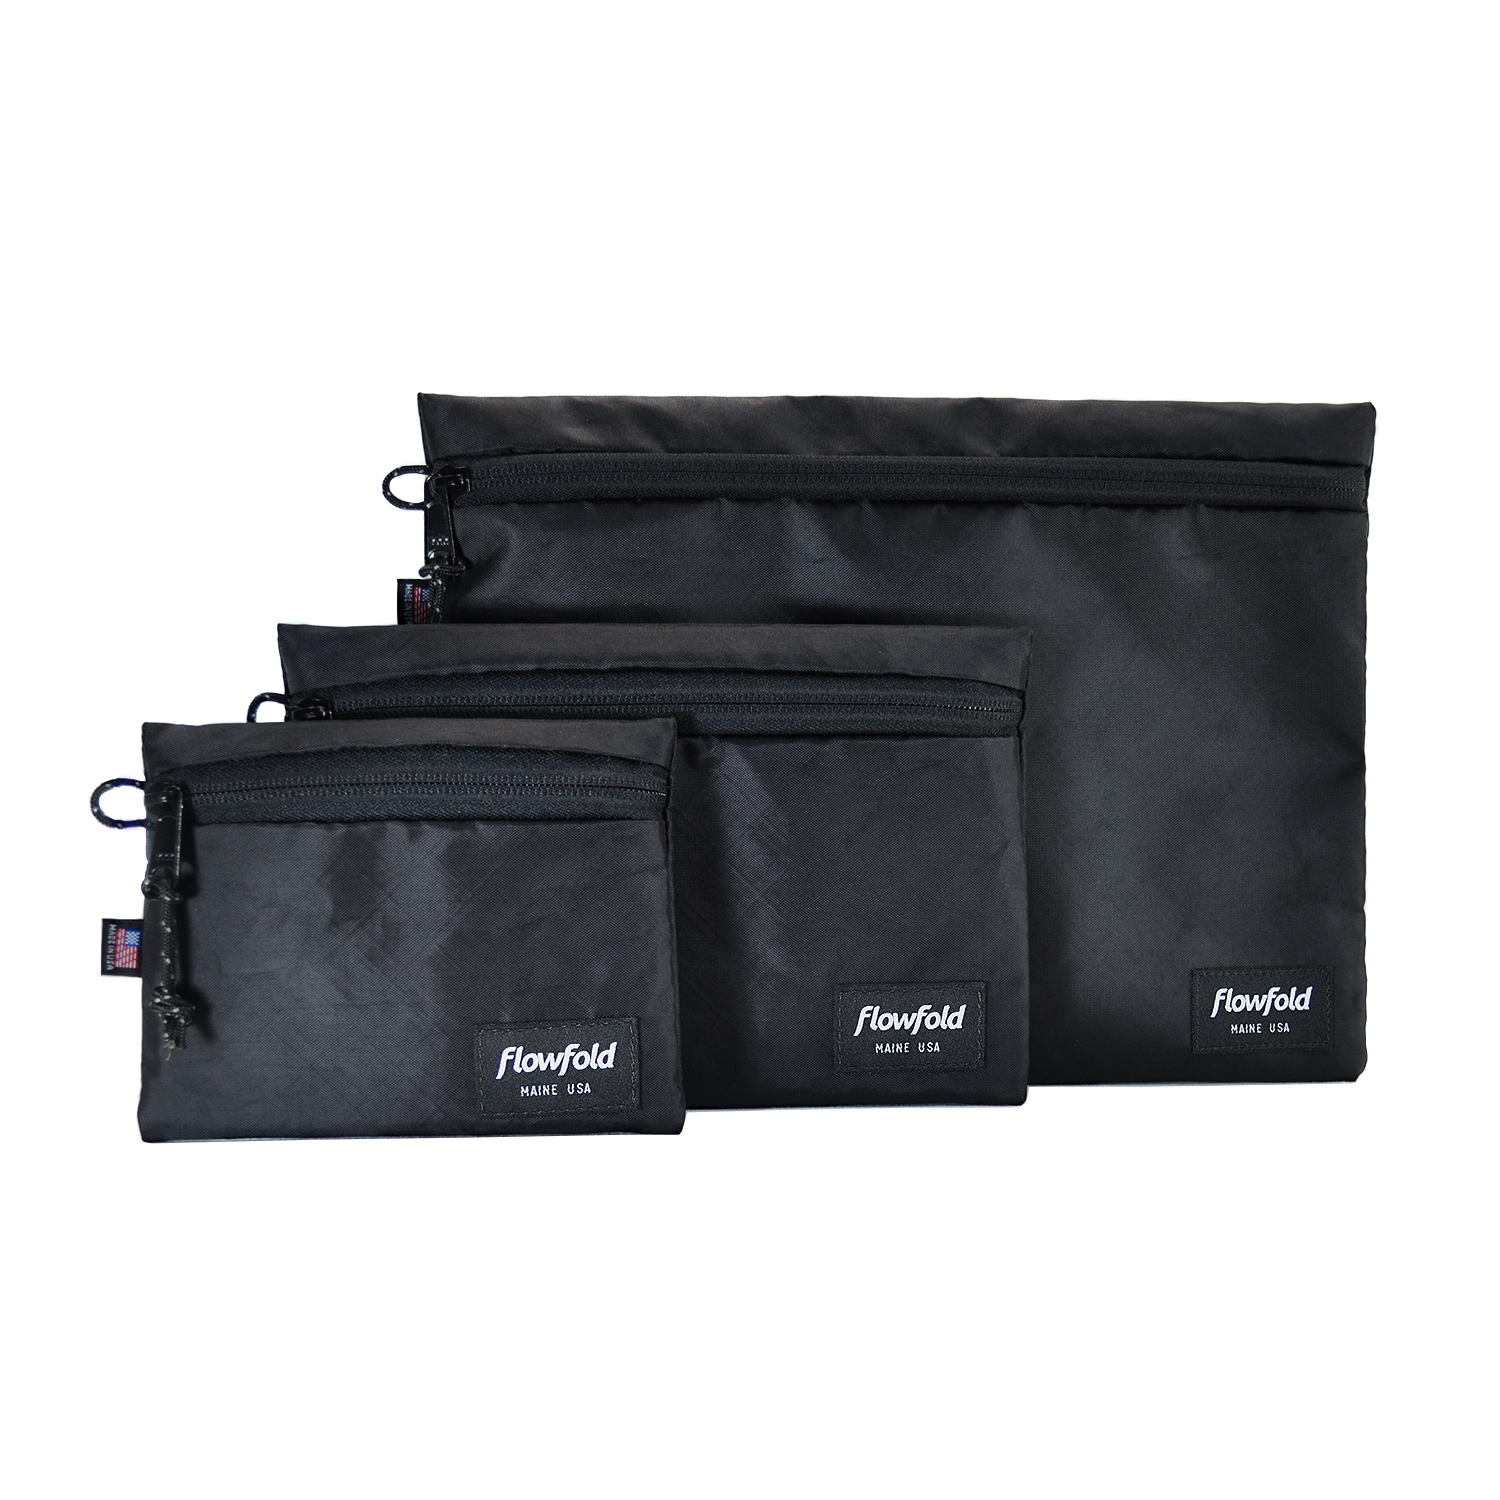 Flowfold Jet Black Voyager Travel Pouches Set of Three Water Resistant Organization Pouches Made in USA